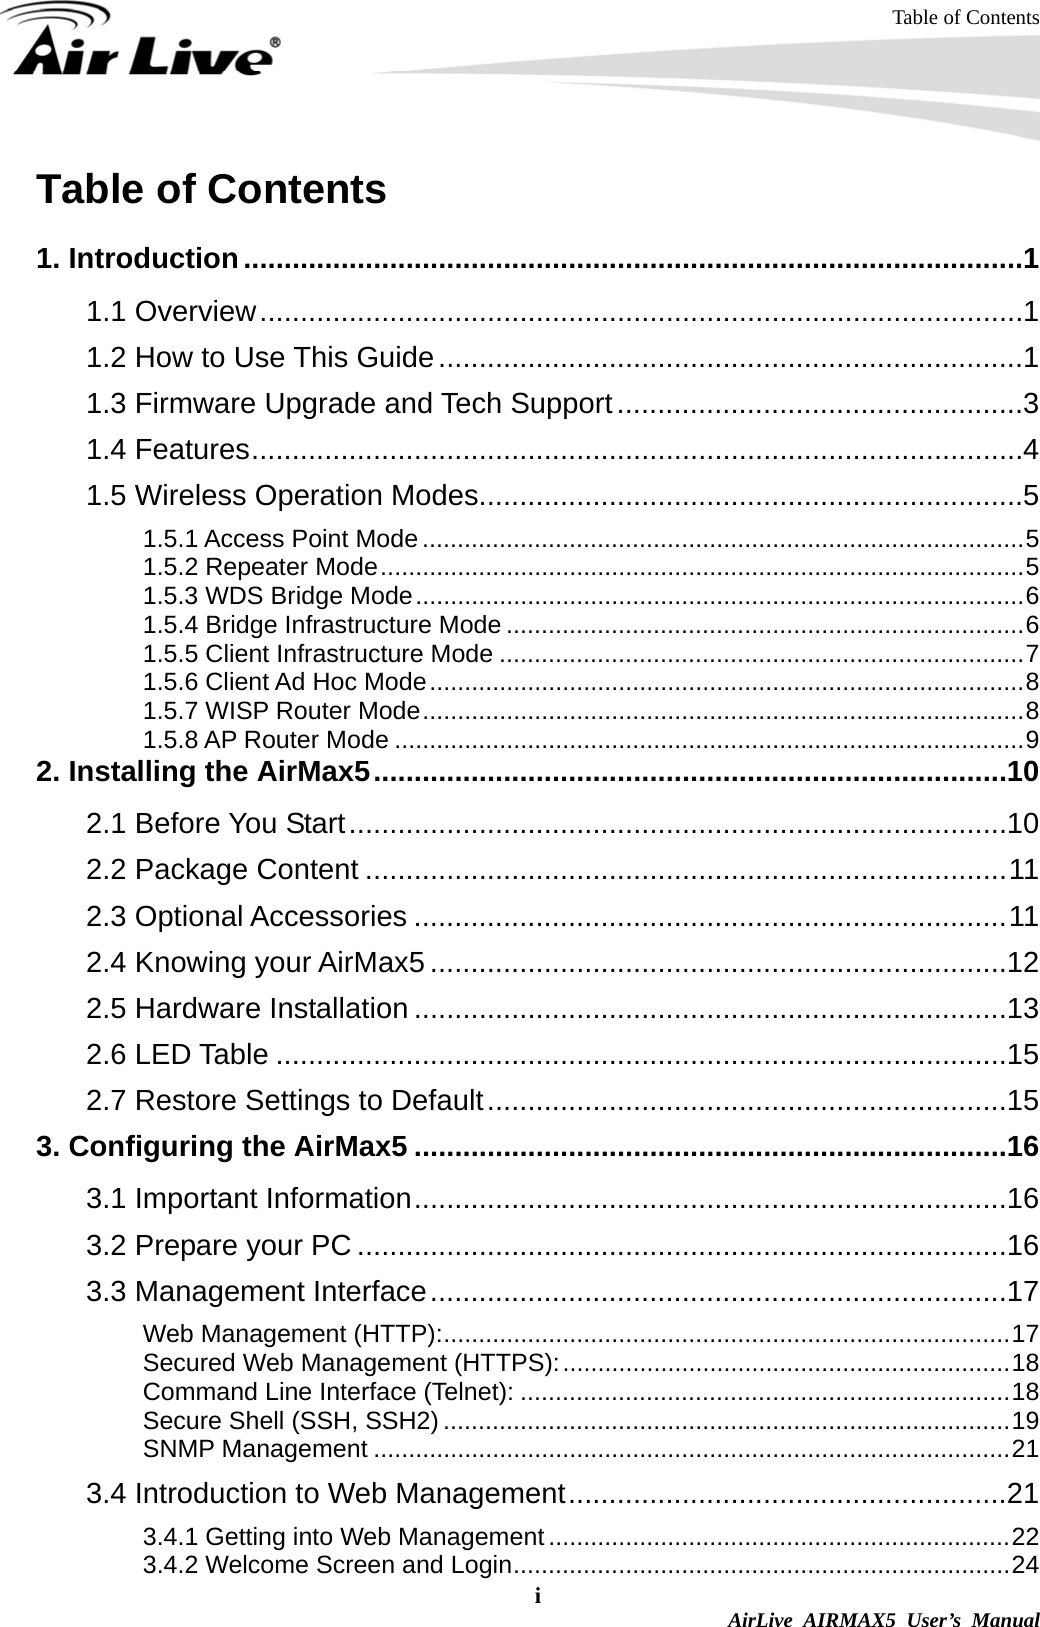 Table of Contents i  AirLive AIRMAX5 User’s Manual Table of Contents  1. Introduction................................................................................................1 1.1 Overview..............................................................................................1 1.2 How to Use This Guide........................................................................1 1.3 Firmware Upgrade and Tech Support..................................................3 1.4 Features...............................................................................................4 1.5 Wireless Operation Modes...................................................................5 1.5.1 Access Point Mode ......................................................................................5 1.5.2 Repeater Mode............................................................................................5 1.5.3 WDS Bridge Mode.......................................................................................6 1.5.4 Bridge Infrastructure Mode ..........................................................................6 1.5.5 Client Infrastructure Mode ...........................................................................7 1.5.6 Client Ad Hoc Mode.....................................................................................8 1.5.7 WISP Router Mode......................................................................................8 1.5.8 AP Router Mode ..........................................................................................9 2. Installing the AirMax5..............................................................................10 2.1 Before You Start.................................................................................10 2.2 Package Content ...............................................................................11 2.3 Optional Accessories .........................................................................11 2.4 Knowing your AirMax5 .......................................................................12 2.5 Hardware Installation .........................................................................13 2.6 LED Table ..........................................................................................15 2.7 Restore Settings to Default................................................................15 3. Configuring the AirMax5 .........................................................................16 3.1 Important Information.........................................................................16 3.2 Prepare your PC ................................................................................16 3.3 Management Interface.......................................................................17 Web Management (HTTP):.................................................................................17 Secured Web Management (HTTPS):................................................................18 Command Line Interface (Telnet): ......................................................................18 Secure Shell (SSH, SSH2) .................................................................................19 SNMP Management ...........................................................................................21 3.4 Introduction to Web Management......................................................21 3.4.1 Getting into Web Management ..................................................................22 3.4.2 Welcome Screen and Login.......................................................................24 